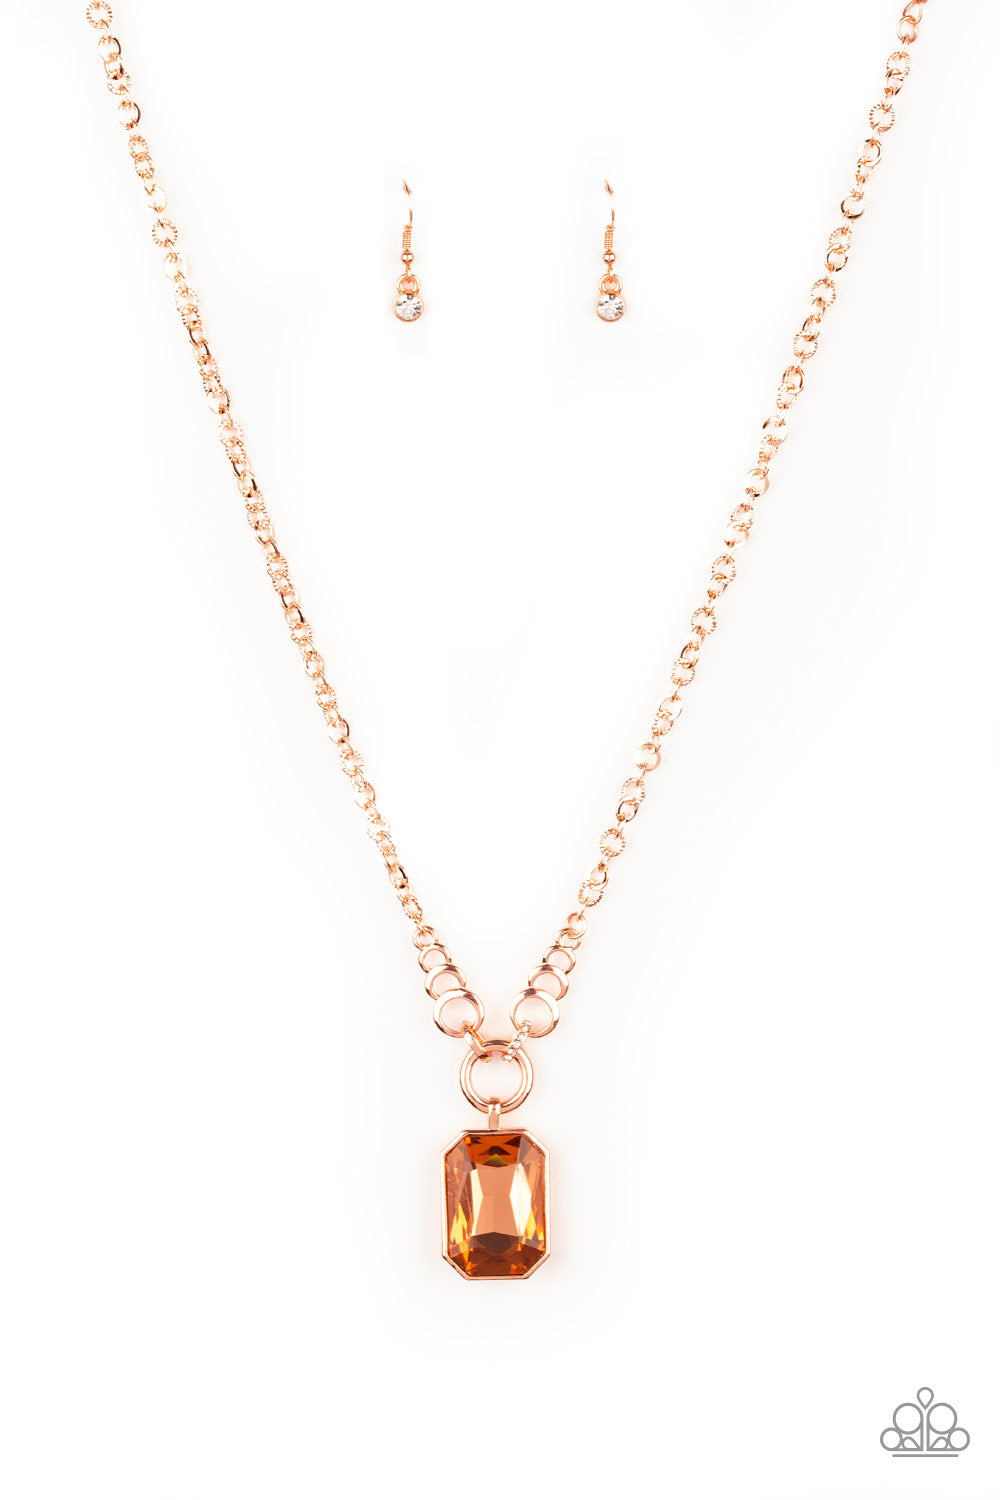 queen-bling-copper-p2re-cpsh-149xx